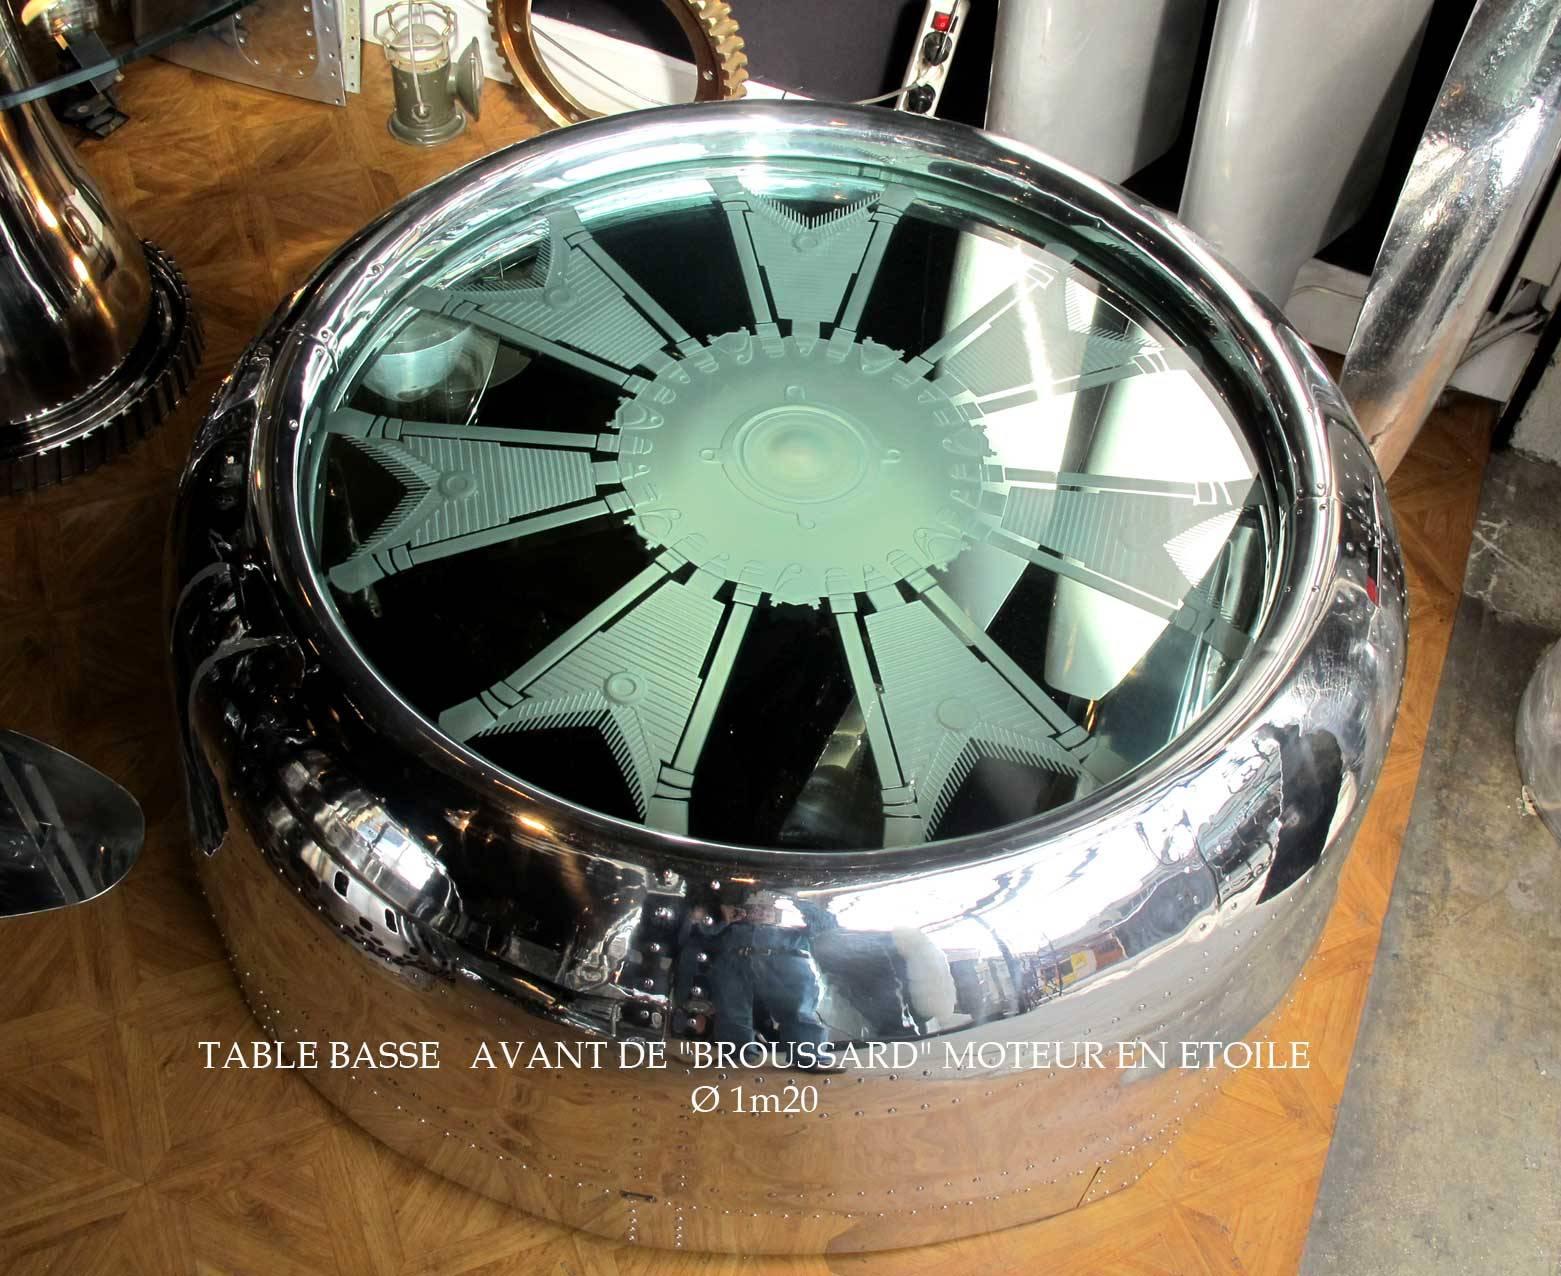 Coffee table - Air Entry of Max-Holste MH-1521 BROUSSARD
Radial engine engraved mirror Diameter 1m10 / 43